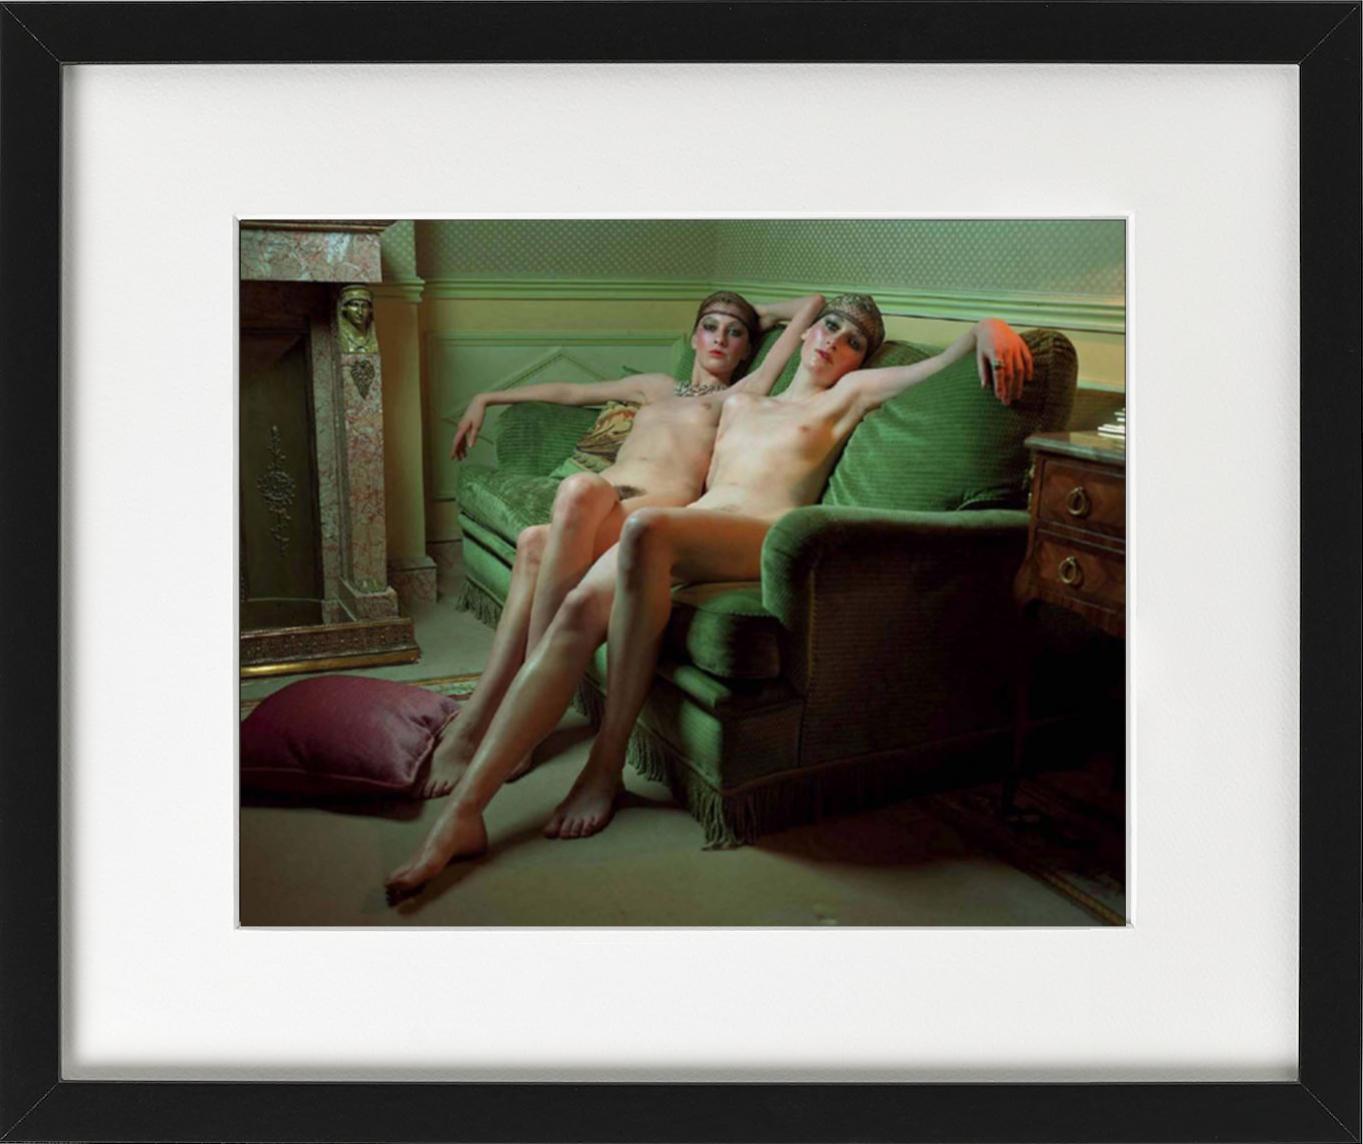 Chanel Story - two nude models on a green sofa, fine art photography, 1996 - Black Color Photograph by Michel Comte